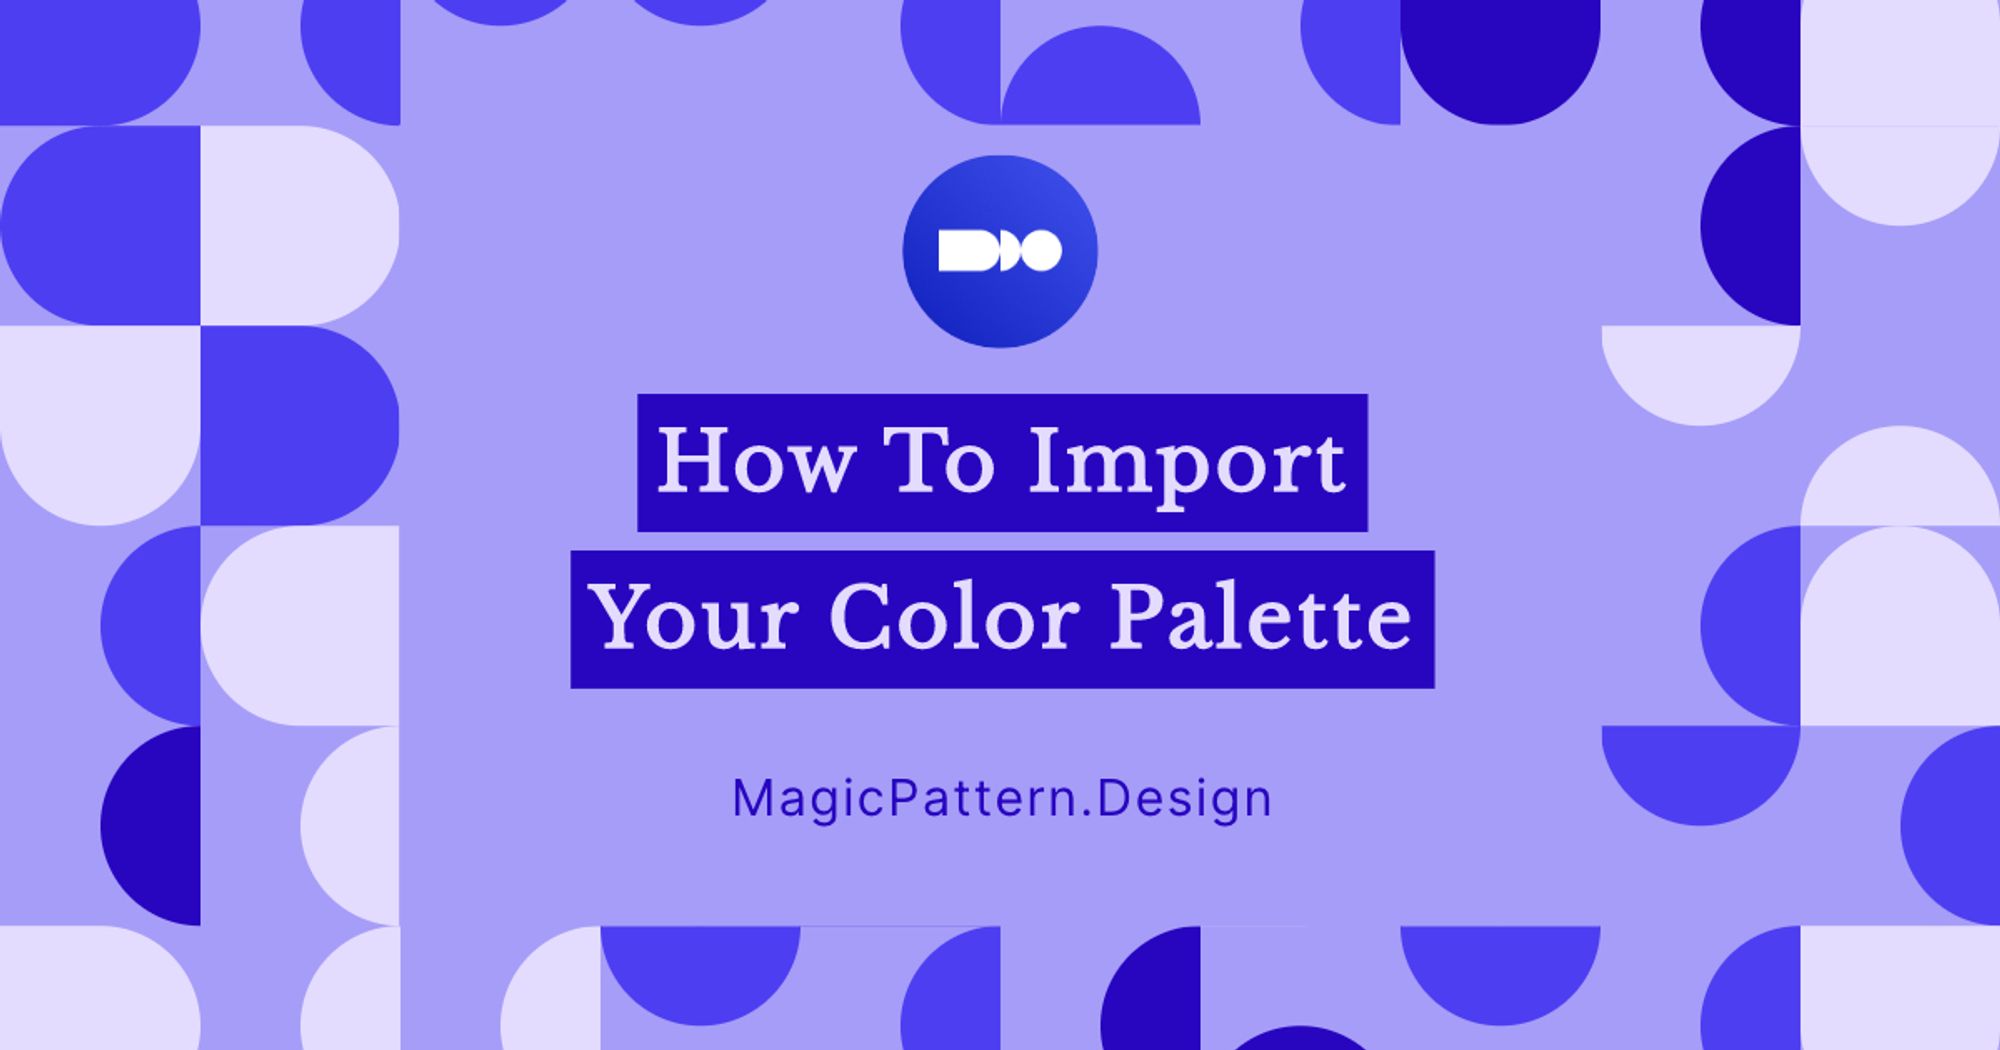 How to import your color palette